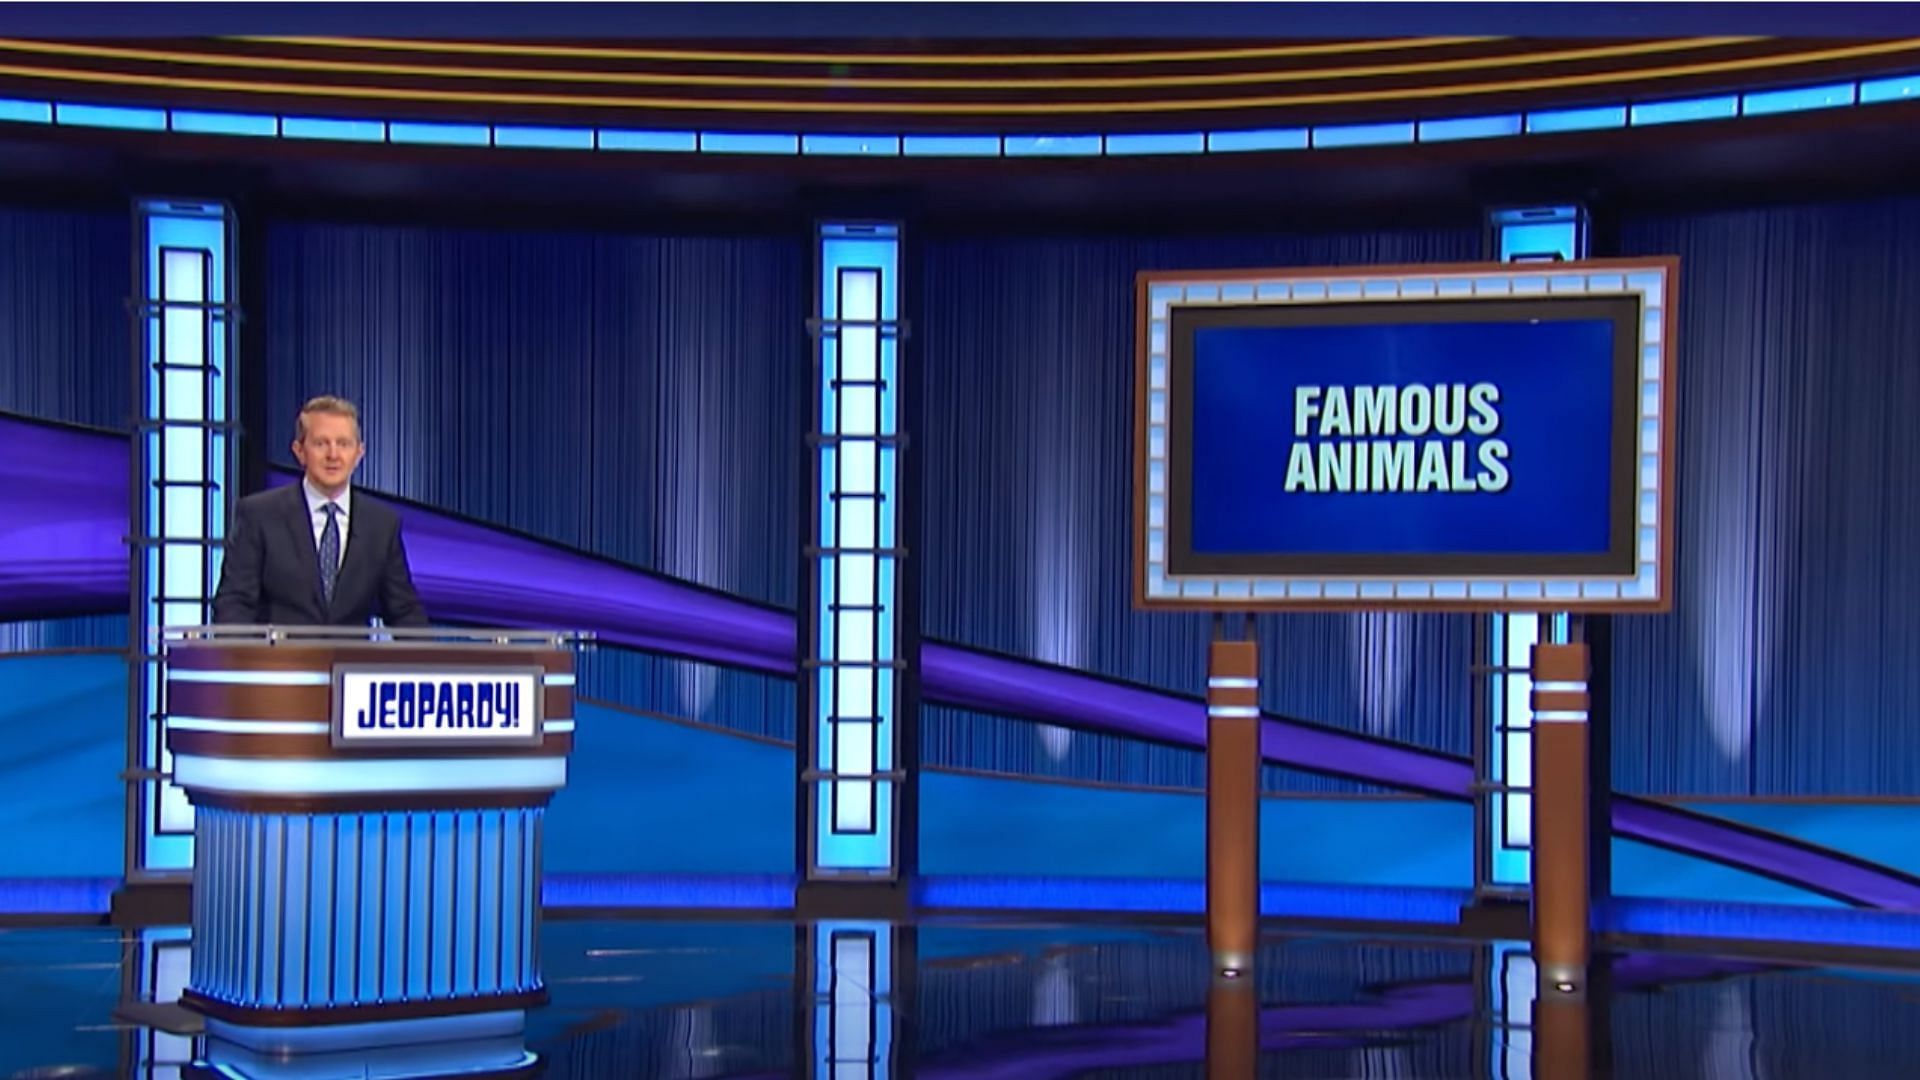 Jeopardy! aired Second Chance competition